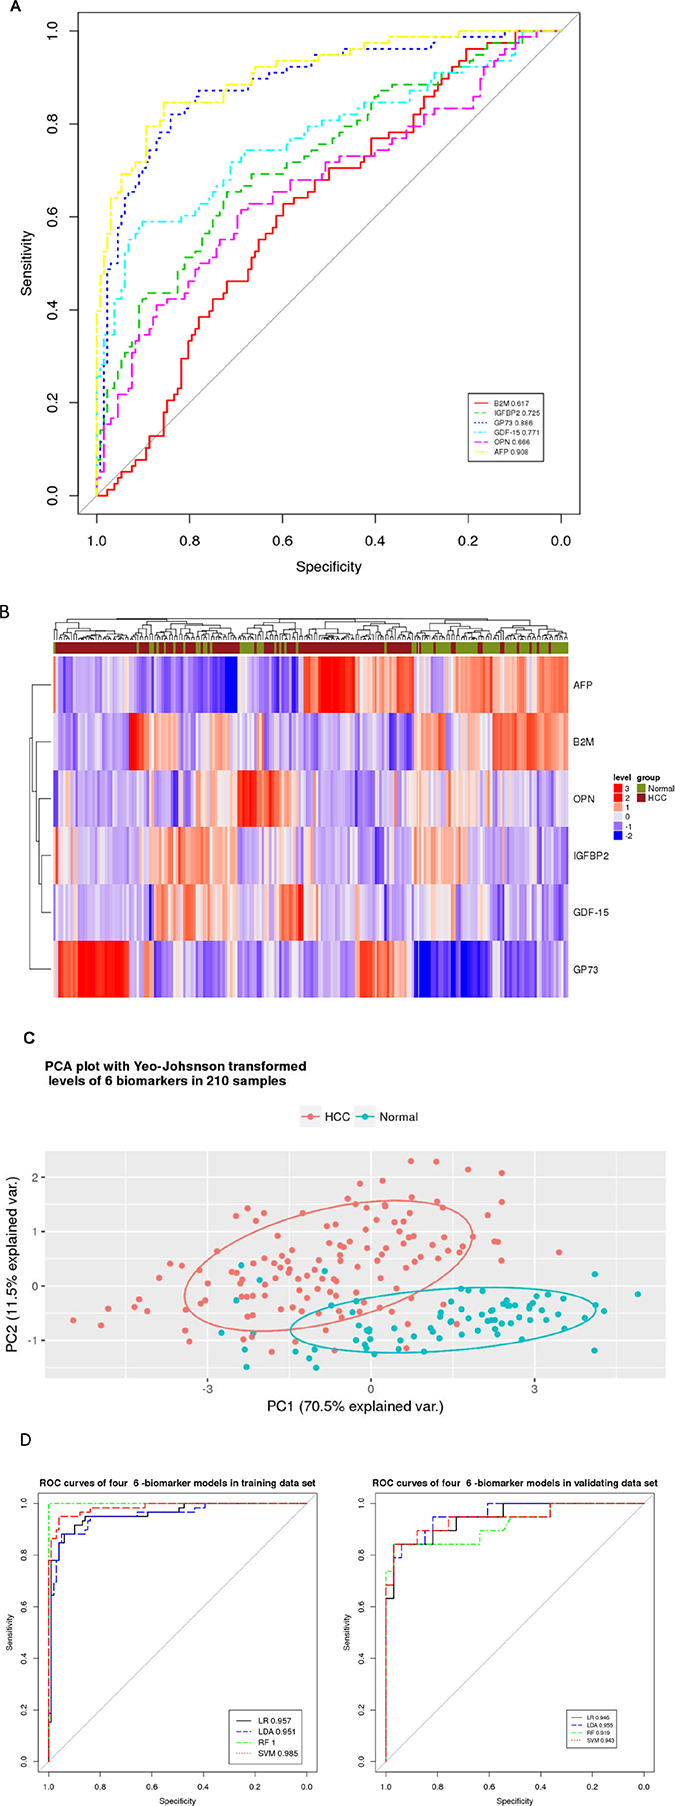 Classification analysis of 6 RPPA-measured proteins in 210 serum samples (132 HCC patients and 78 healthy controls) to evaluate their diagnostic performance as biomarkers of HCC.